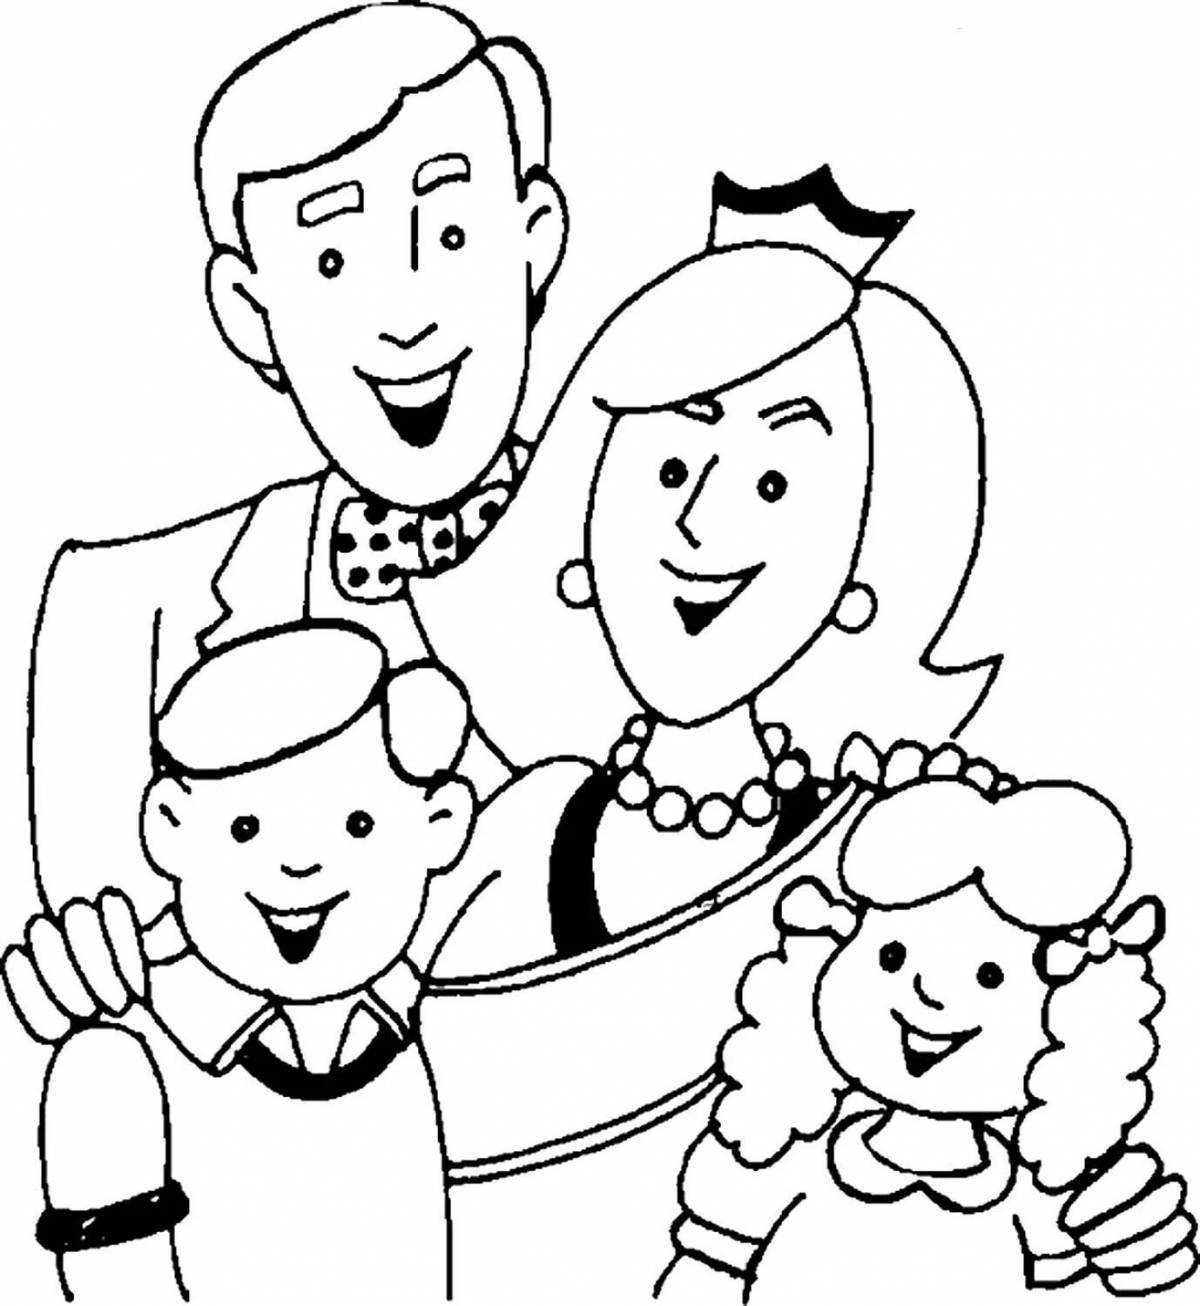 Holiday family coloring book